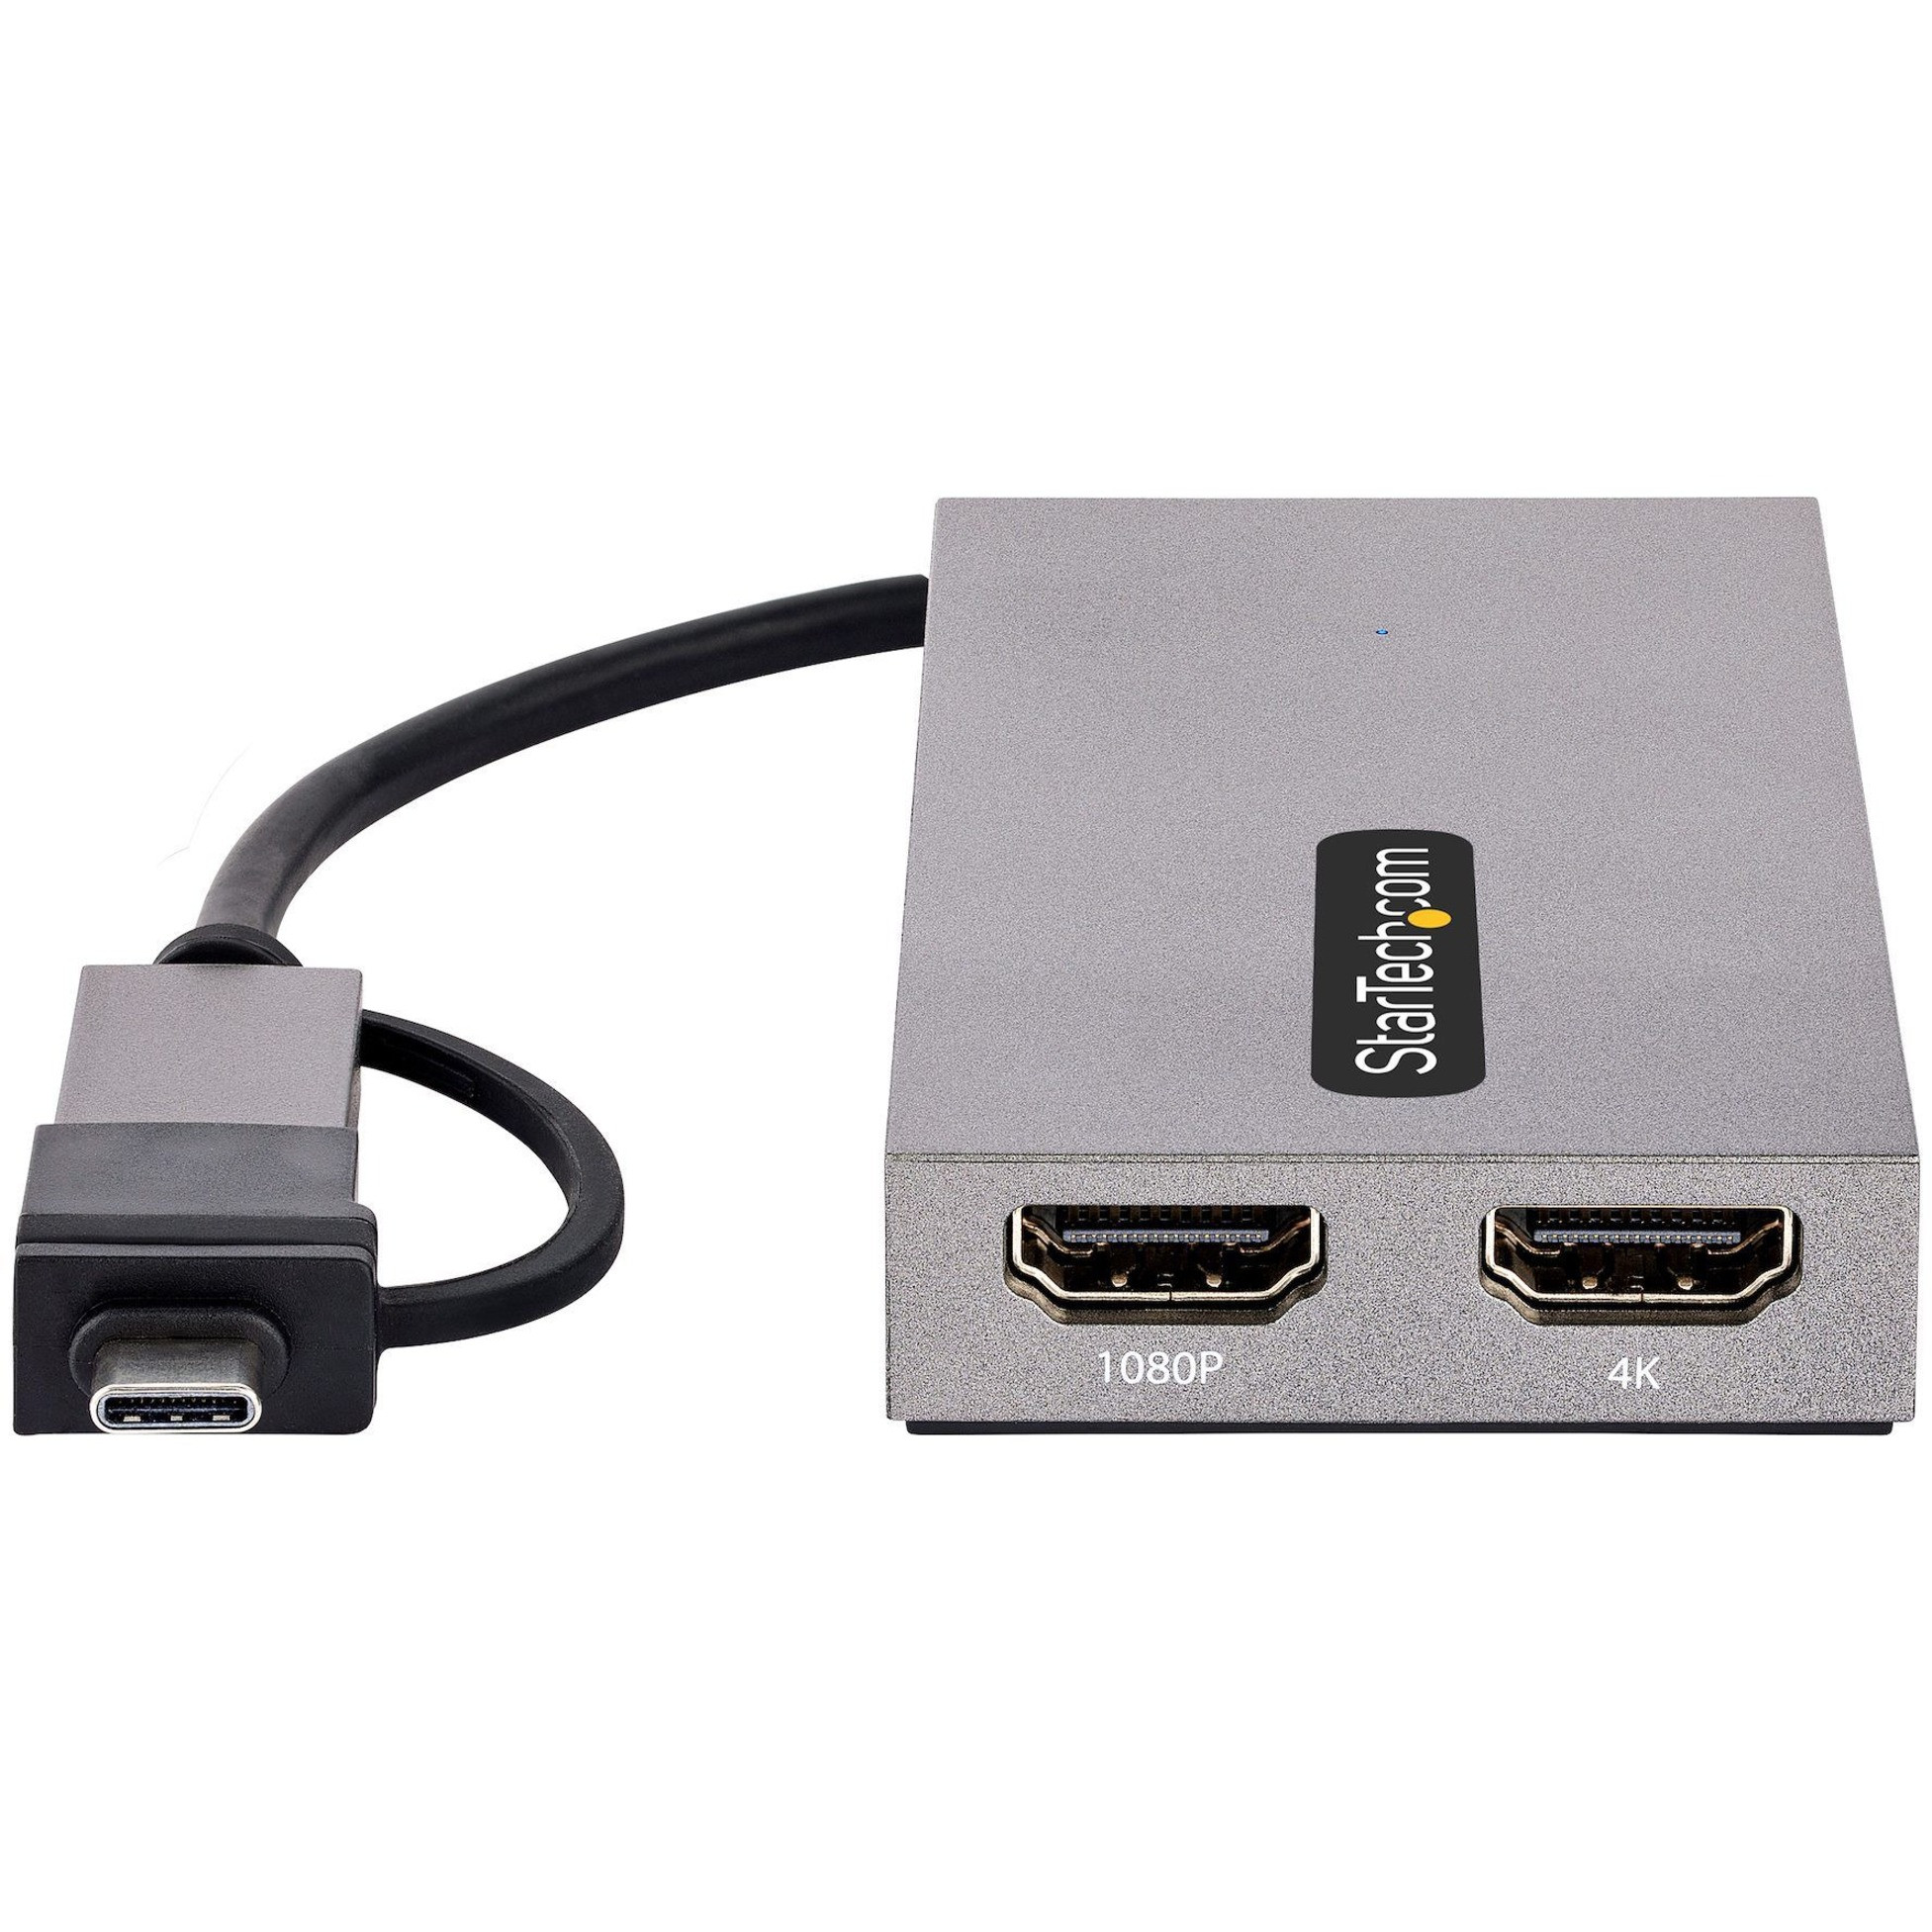 USB to Dual HDMI Adapter, USB A/C to 2x HDMI Displays (1x 4K30Hz, 1x  1080p), Integrated USB-A to C Dongle, 4in/11cm Cable, USB 3.0 to HDMI  Display